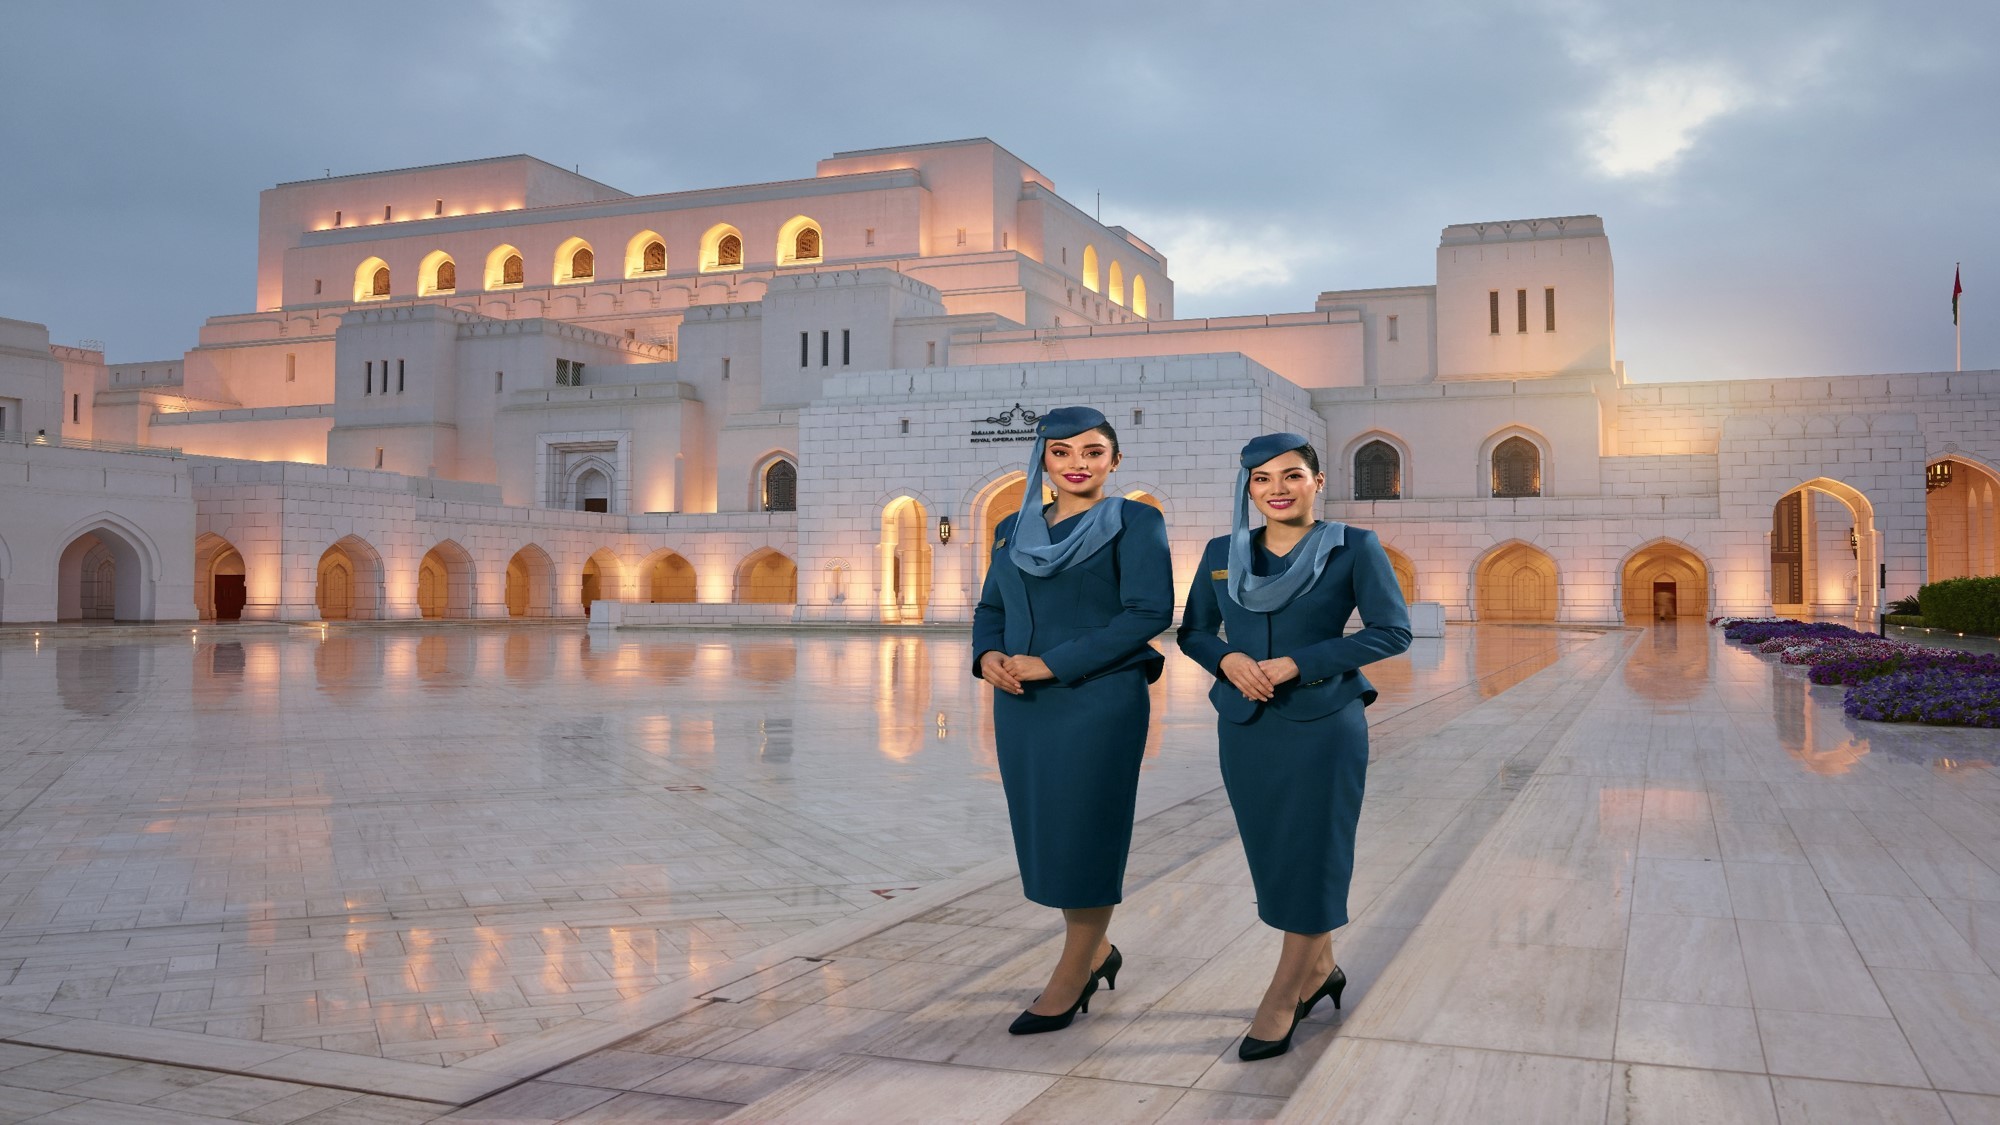 Thrilling cultural performances await you at The Royal Opera House in Muscat